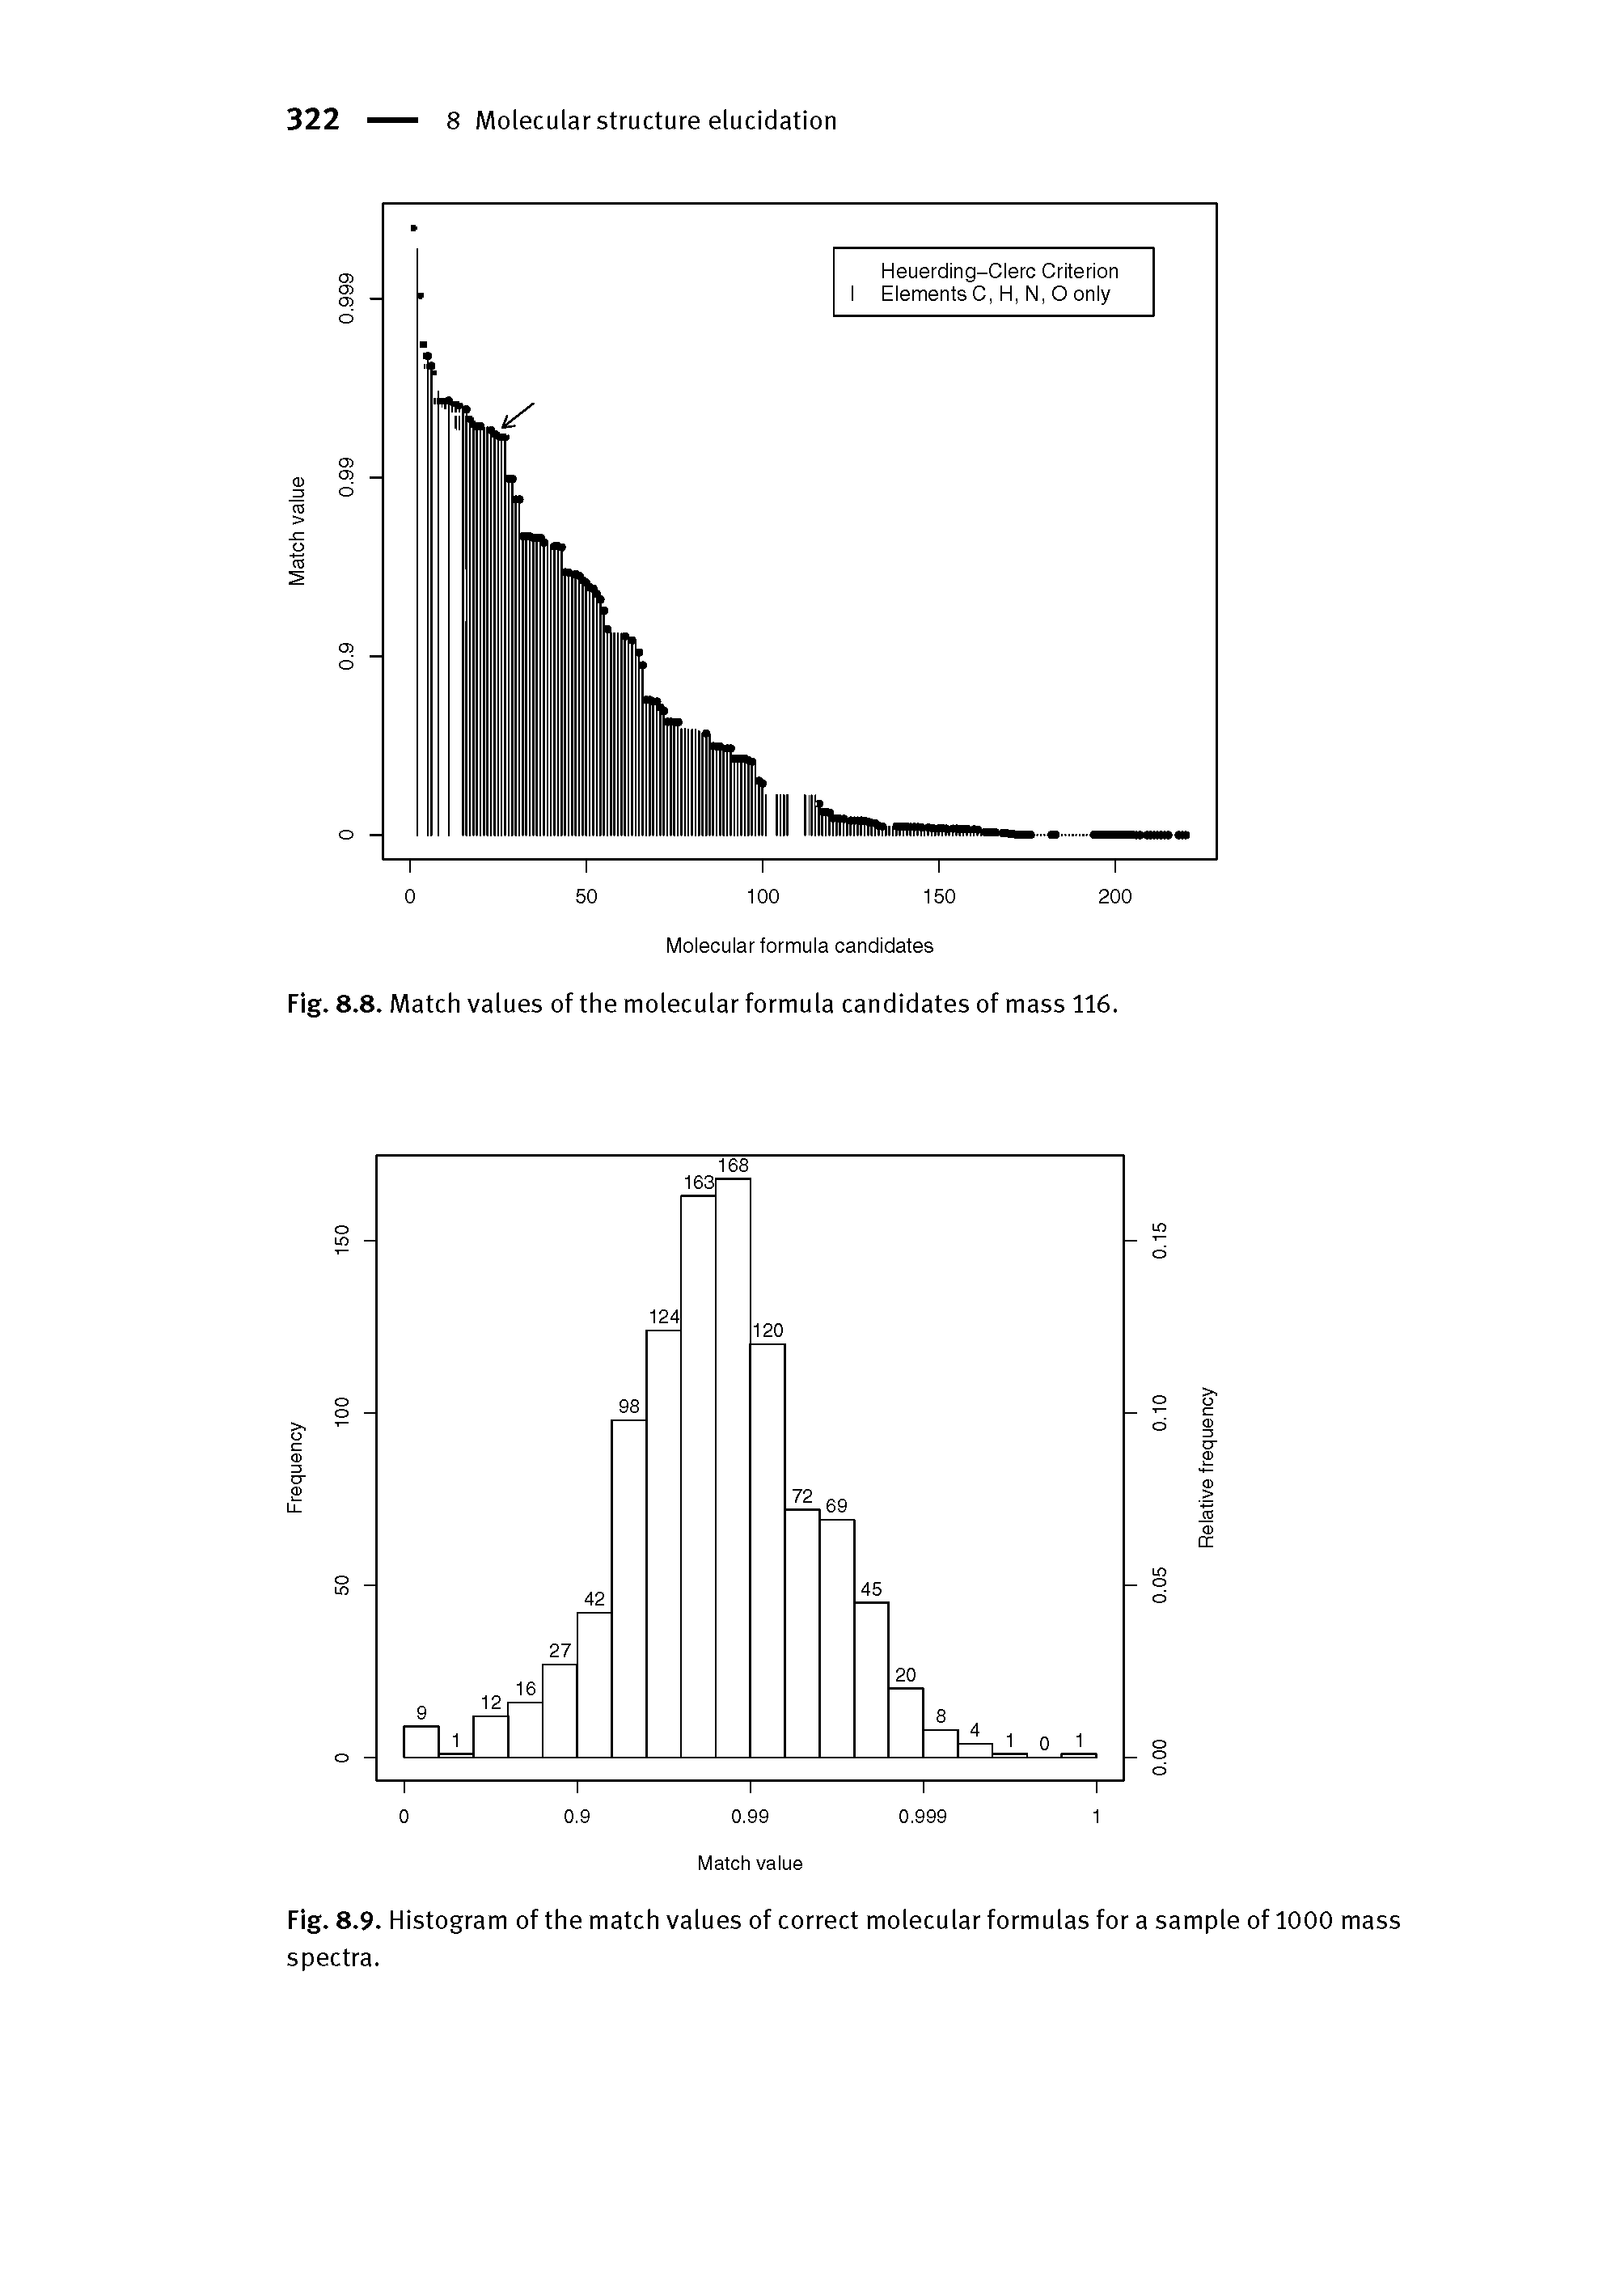 Fig. 8.8. Match values of the molecular formula candidates of mass 116.